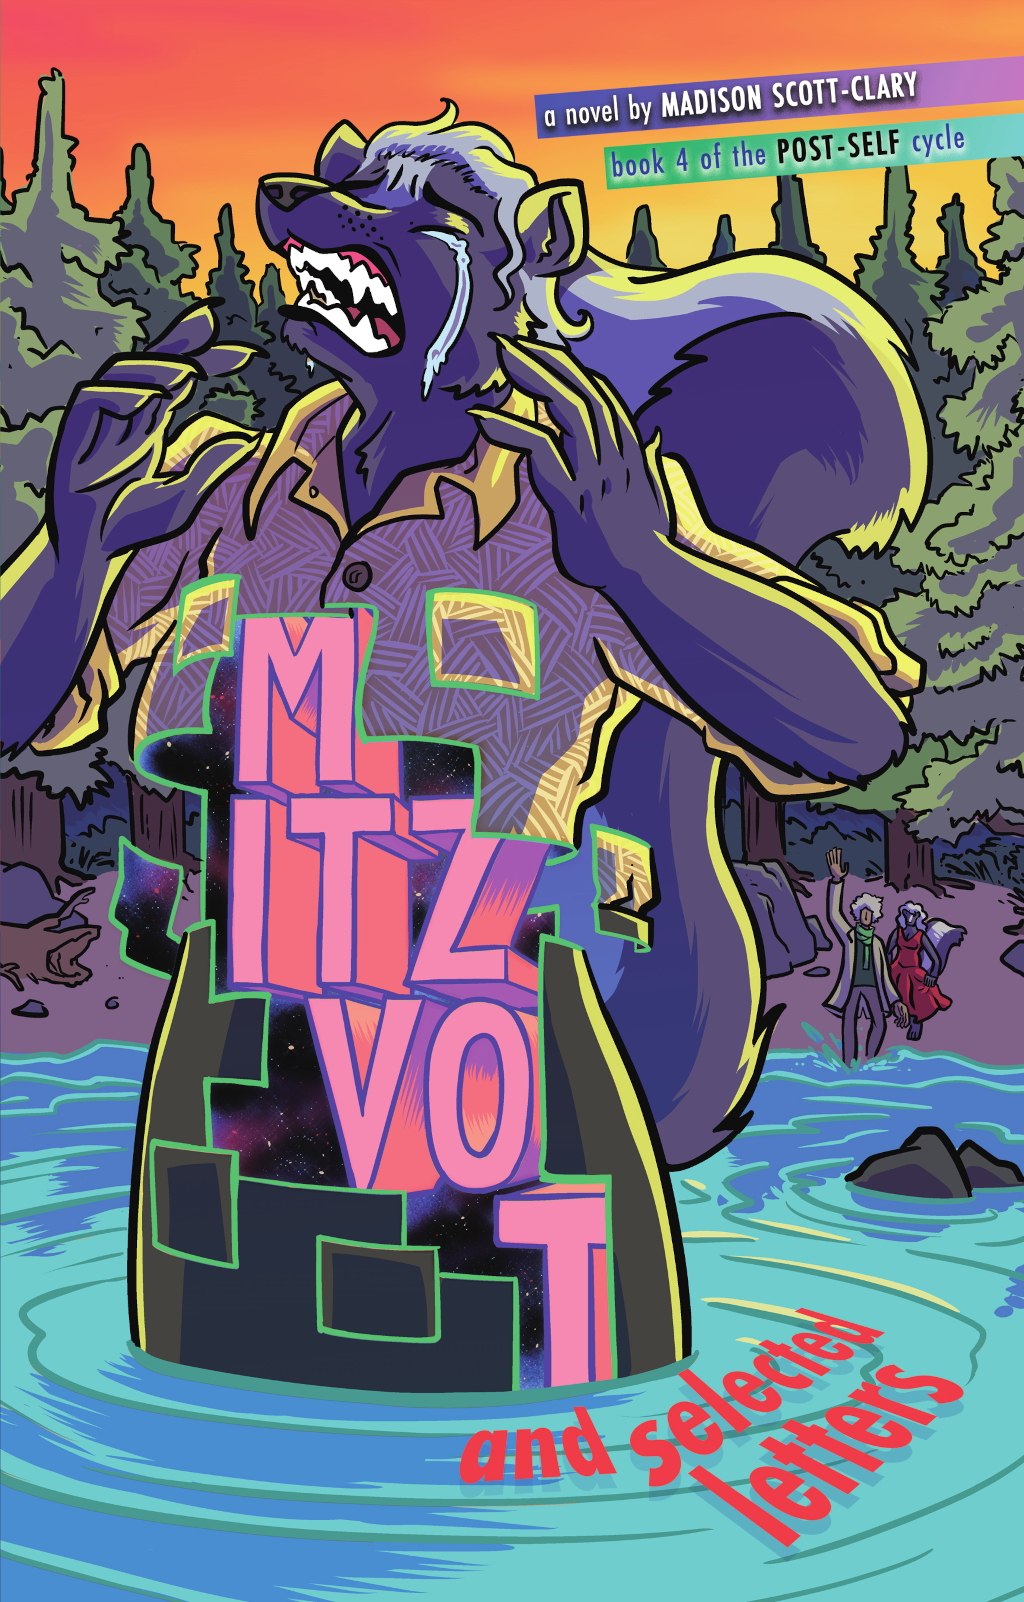 The front cover of Mitzvot - an anthropomorphic skunk standing in a lake, sobbing